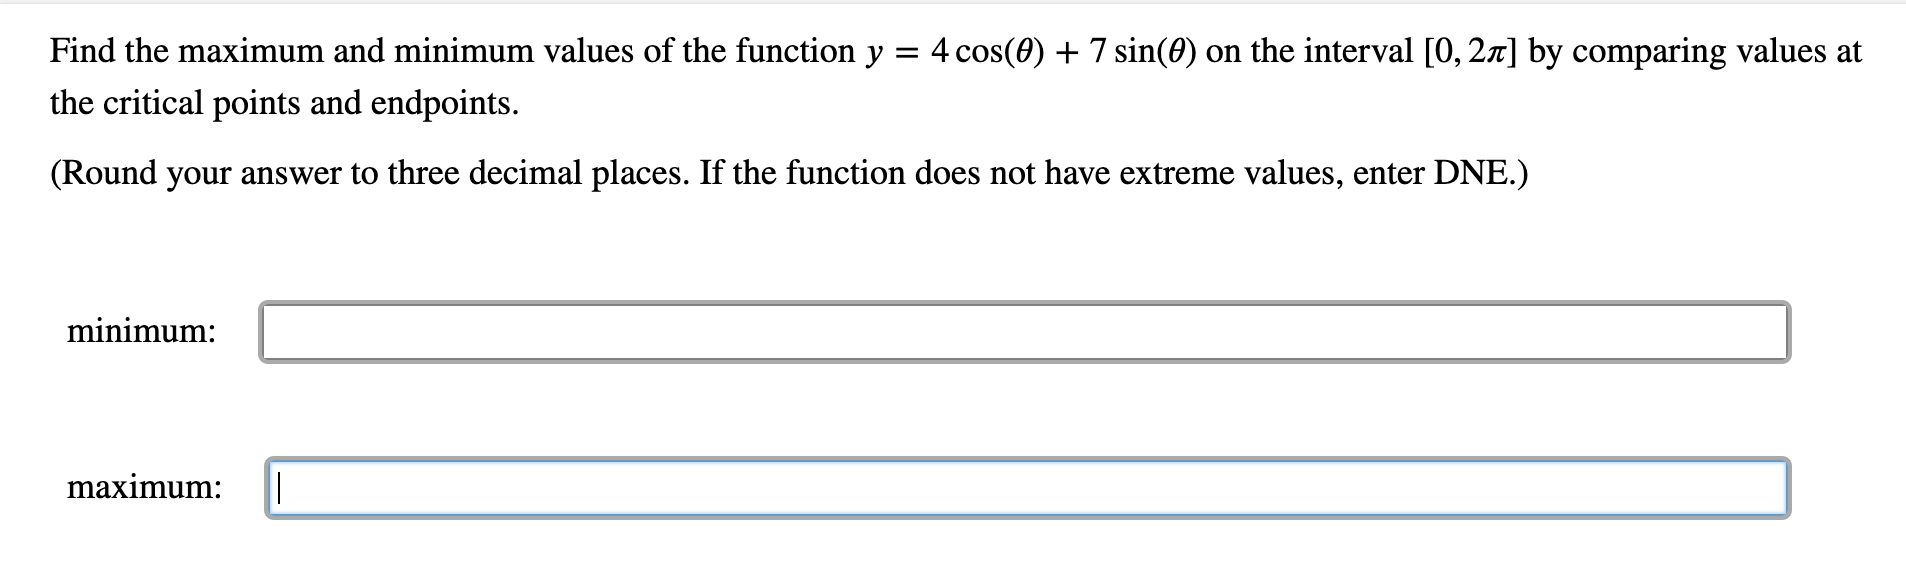 Find the maximum and minimum values of the function y = 4 cos(0) 7 sin(e) on the interval [0, 2x] by comparing values at
the critical points and endpoints.
(Round your answer to three decimal places. If the function does not have extreme values, enter DNE.)
minimum:
maximum:
